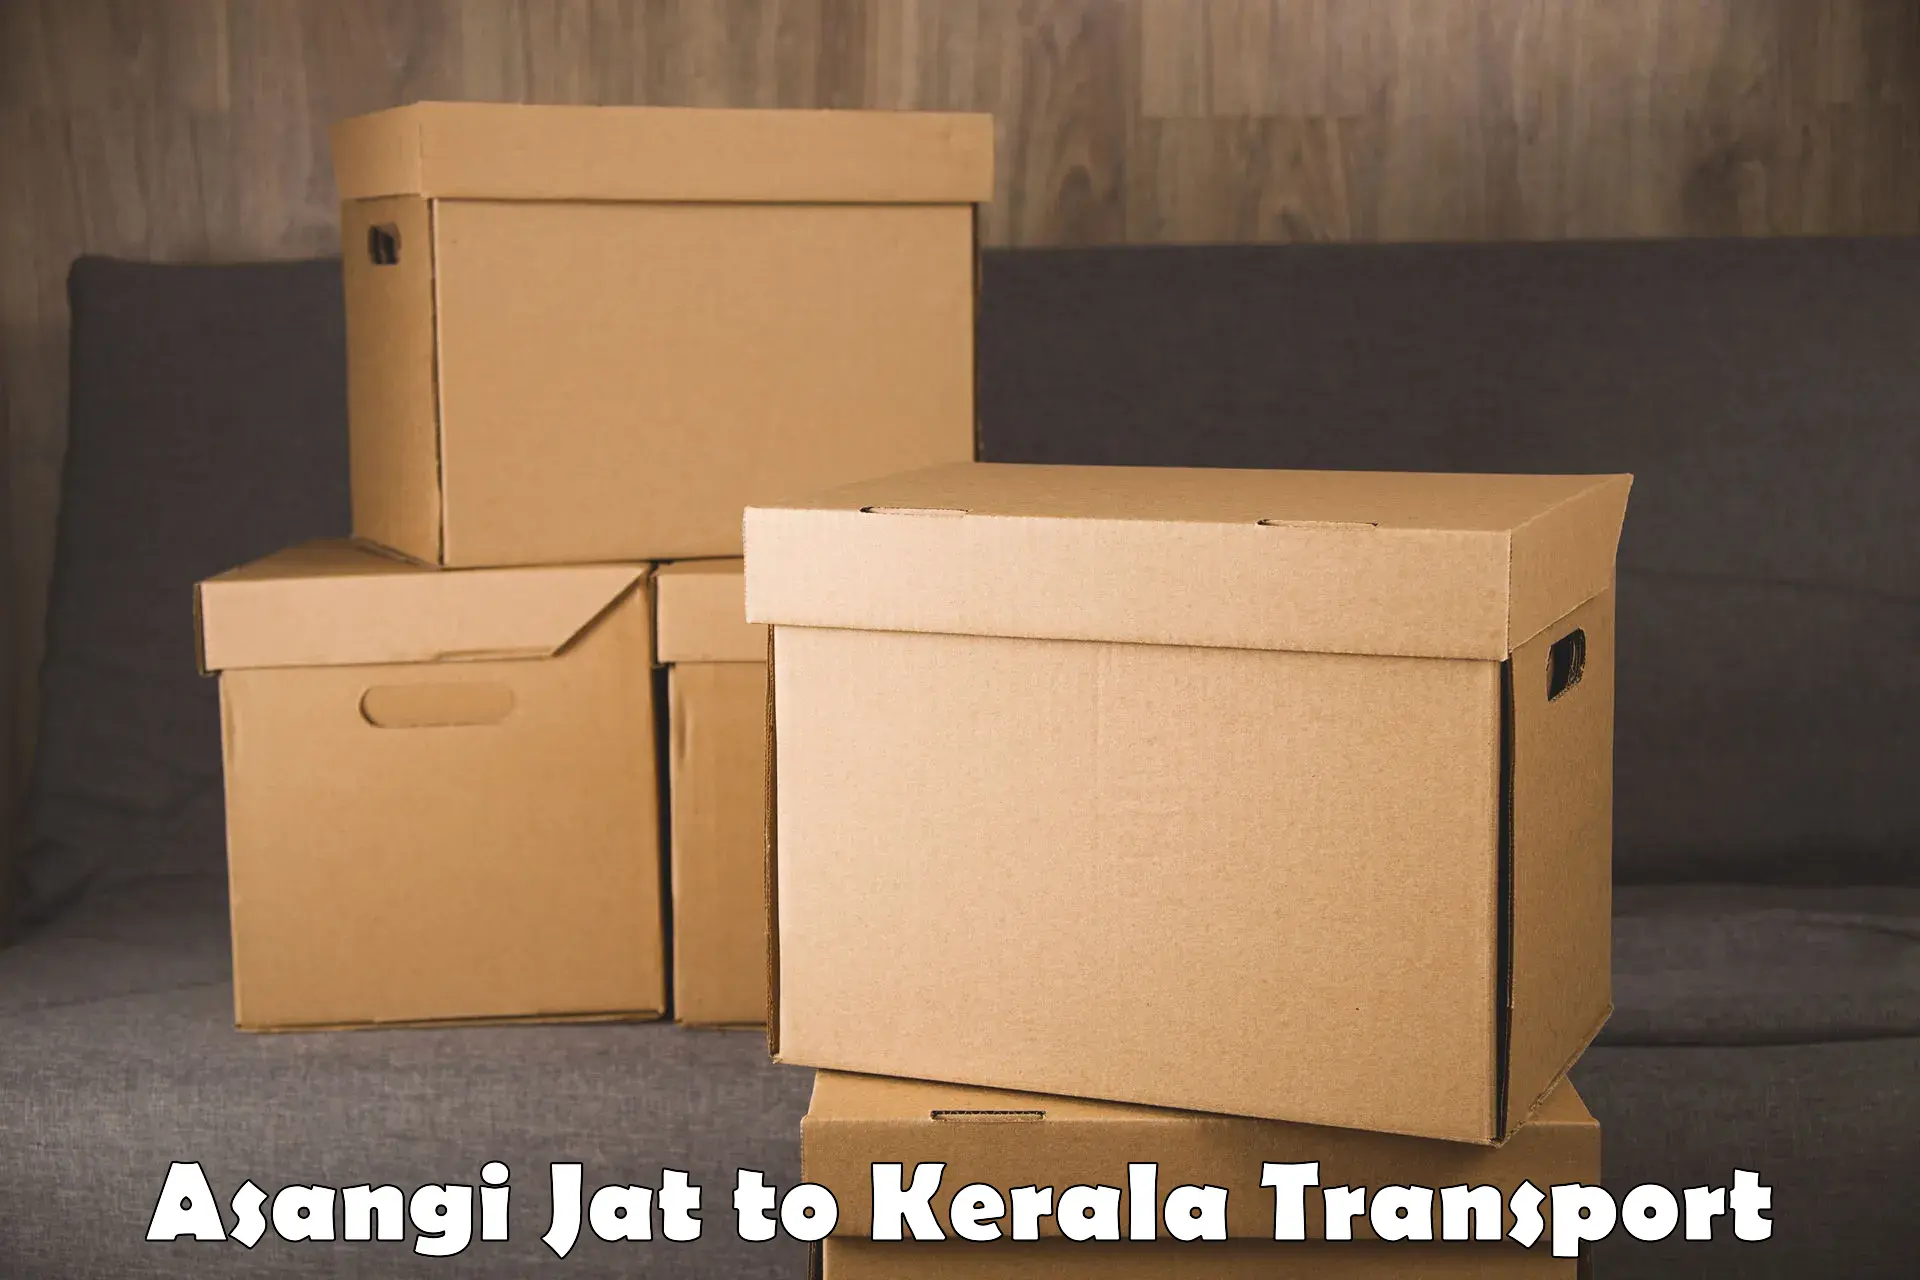 Container transportation services in Asangi Jat to Palakkad